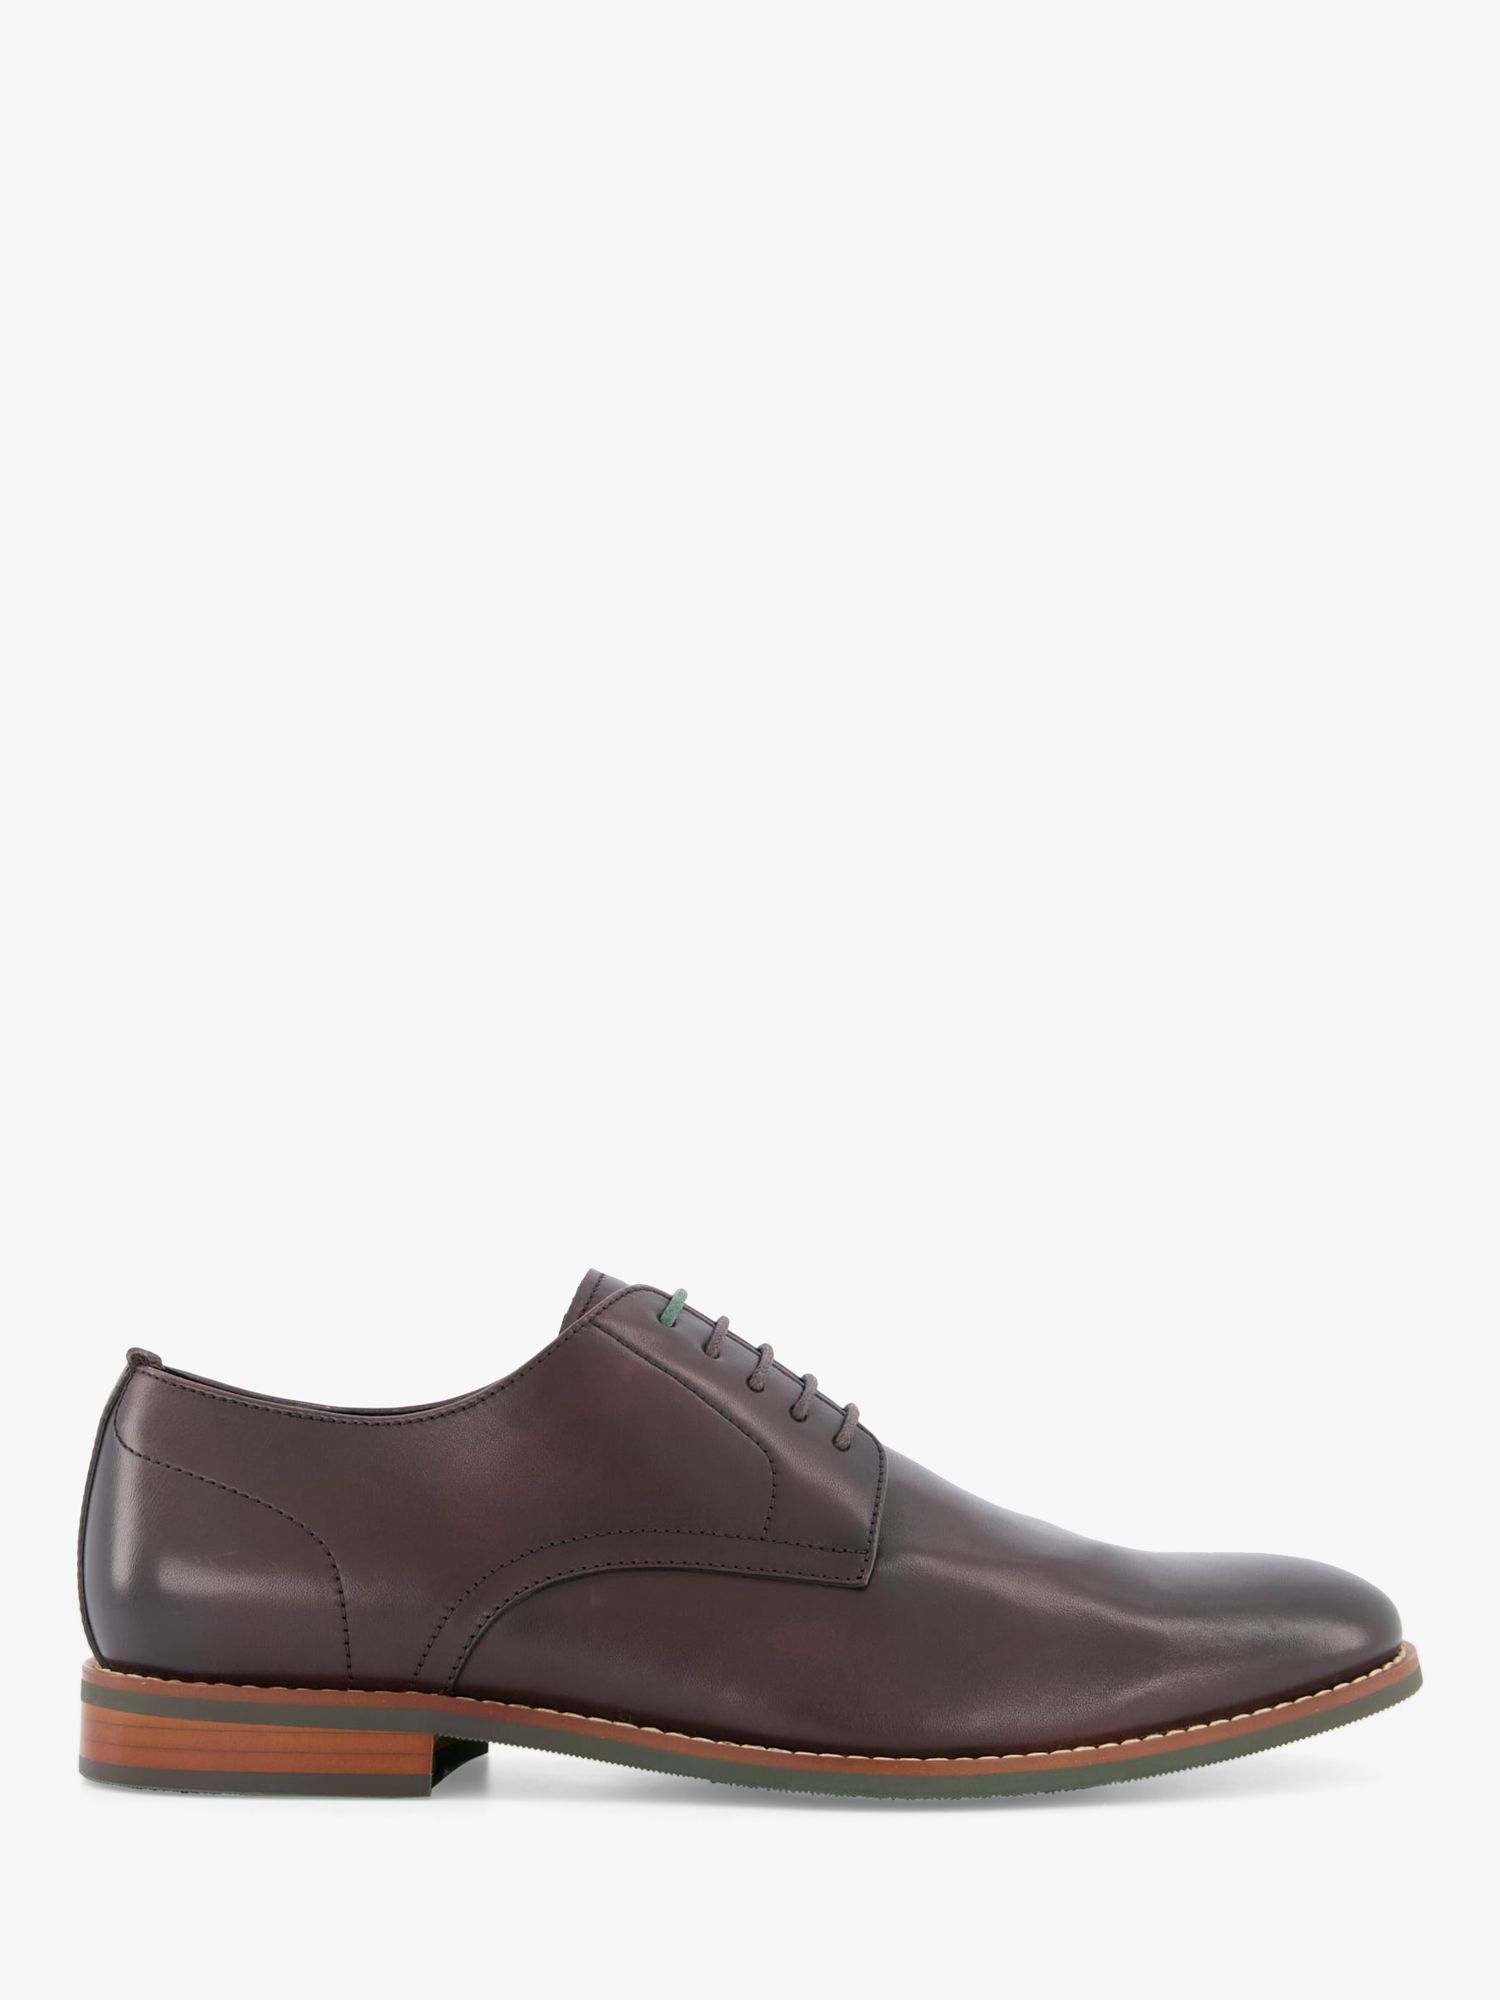 Dune Suffolks Leather Gibson Shoes, Dark Brown at John Lewis & Partners